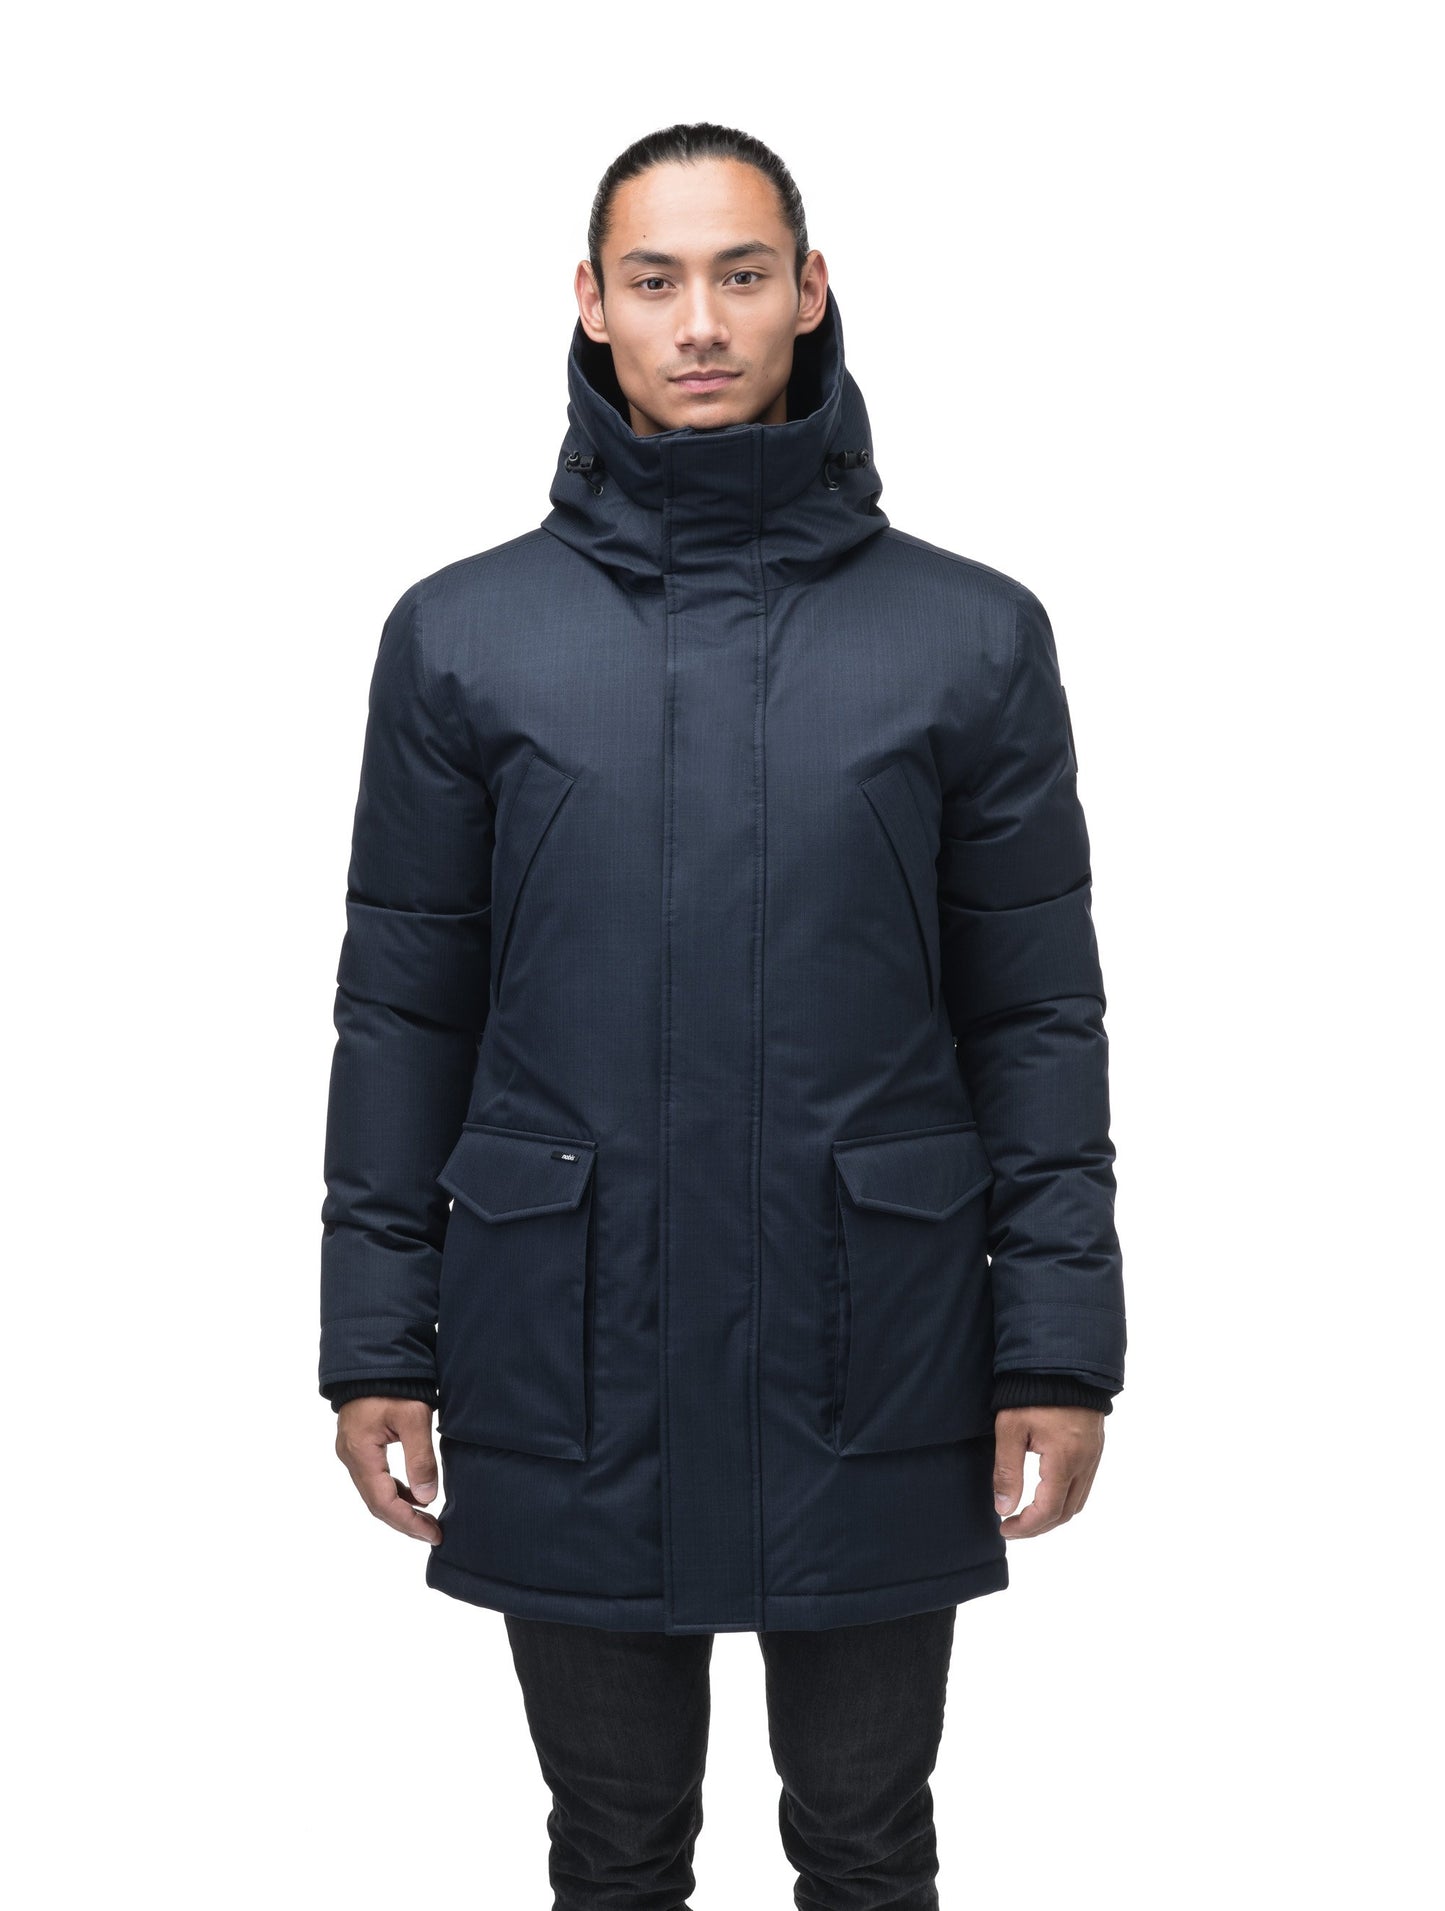 Men's thigh length down-filled parka with non-removable hood in Navy